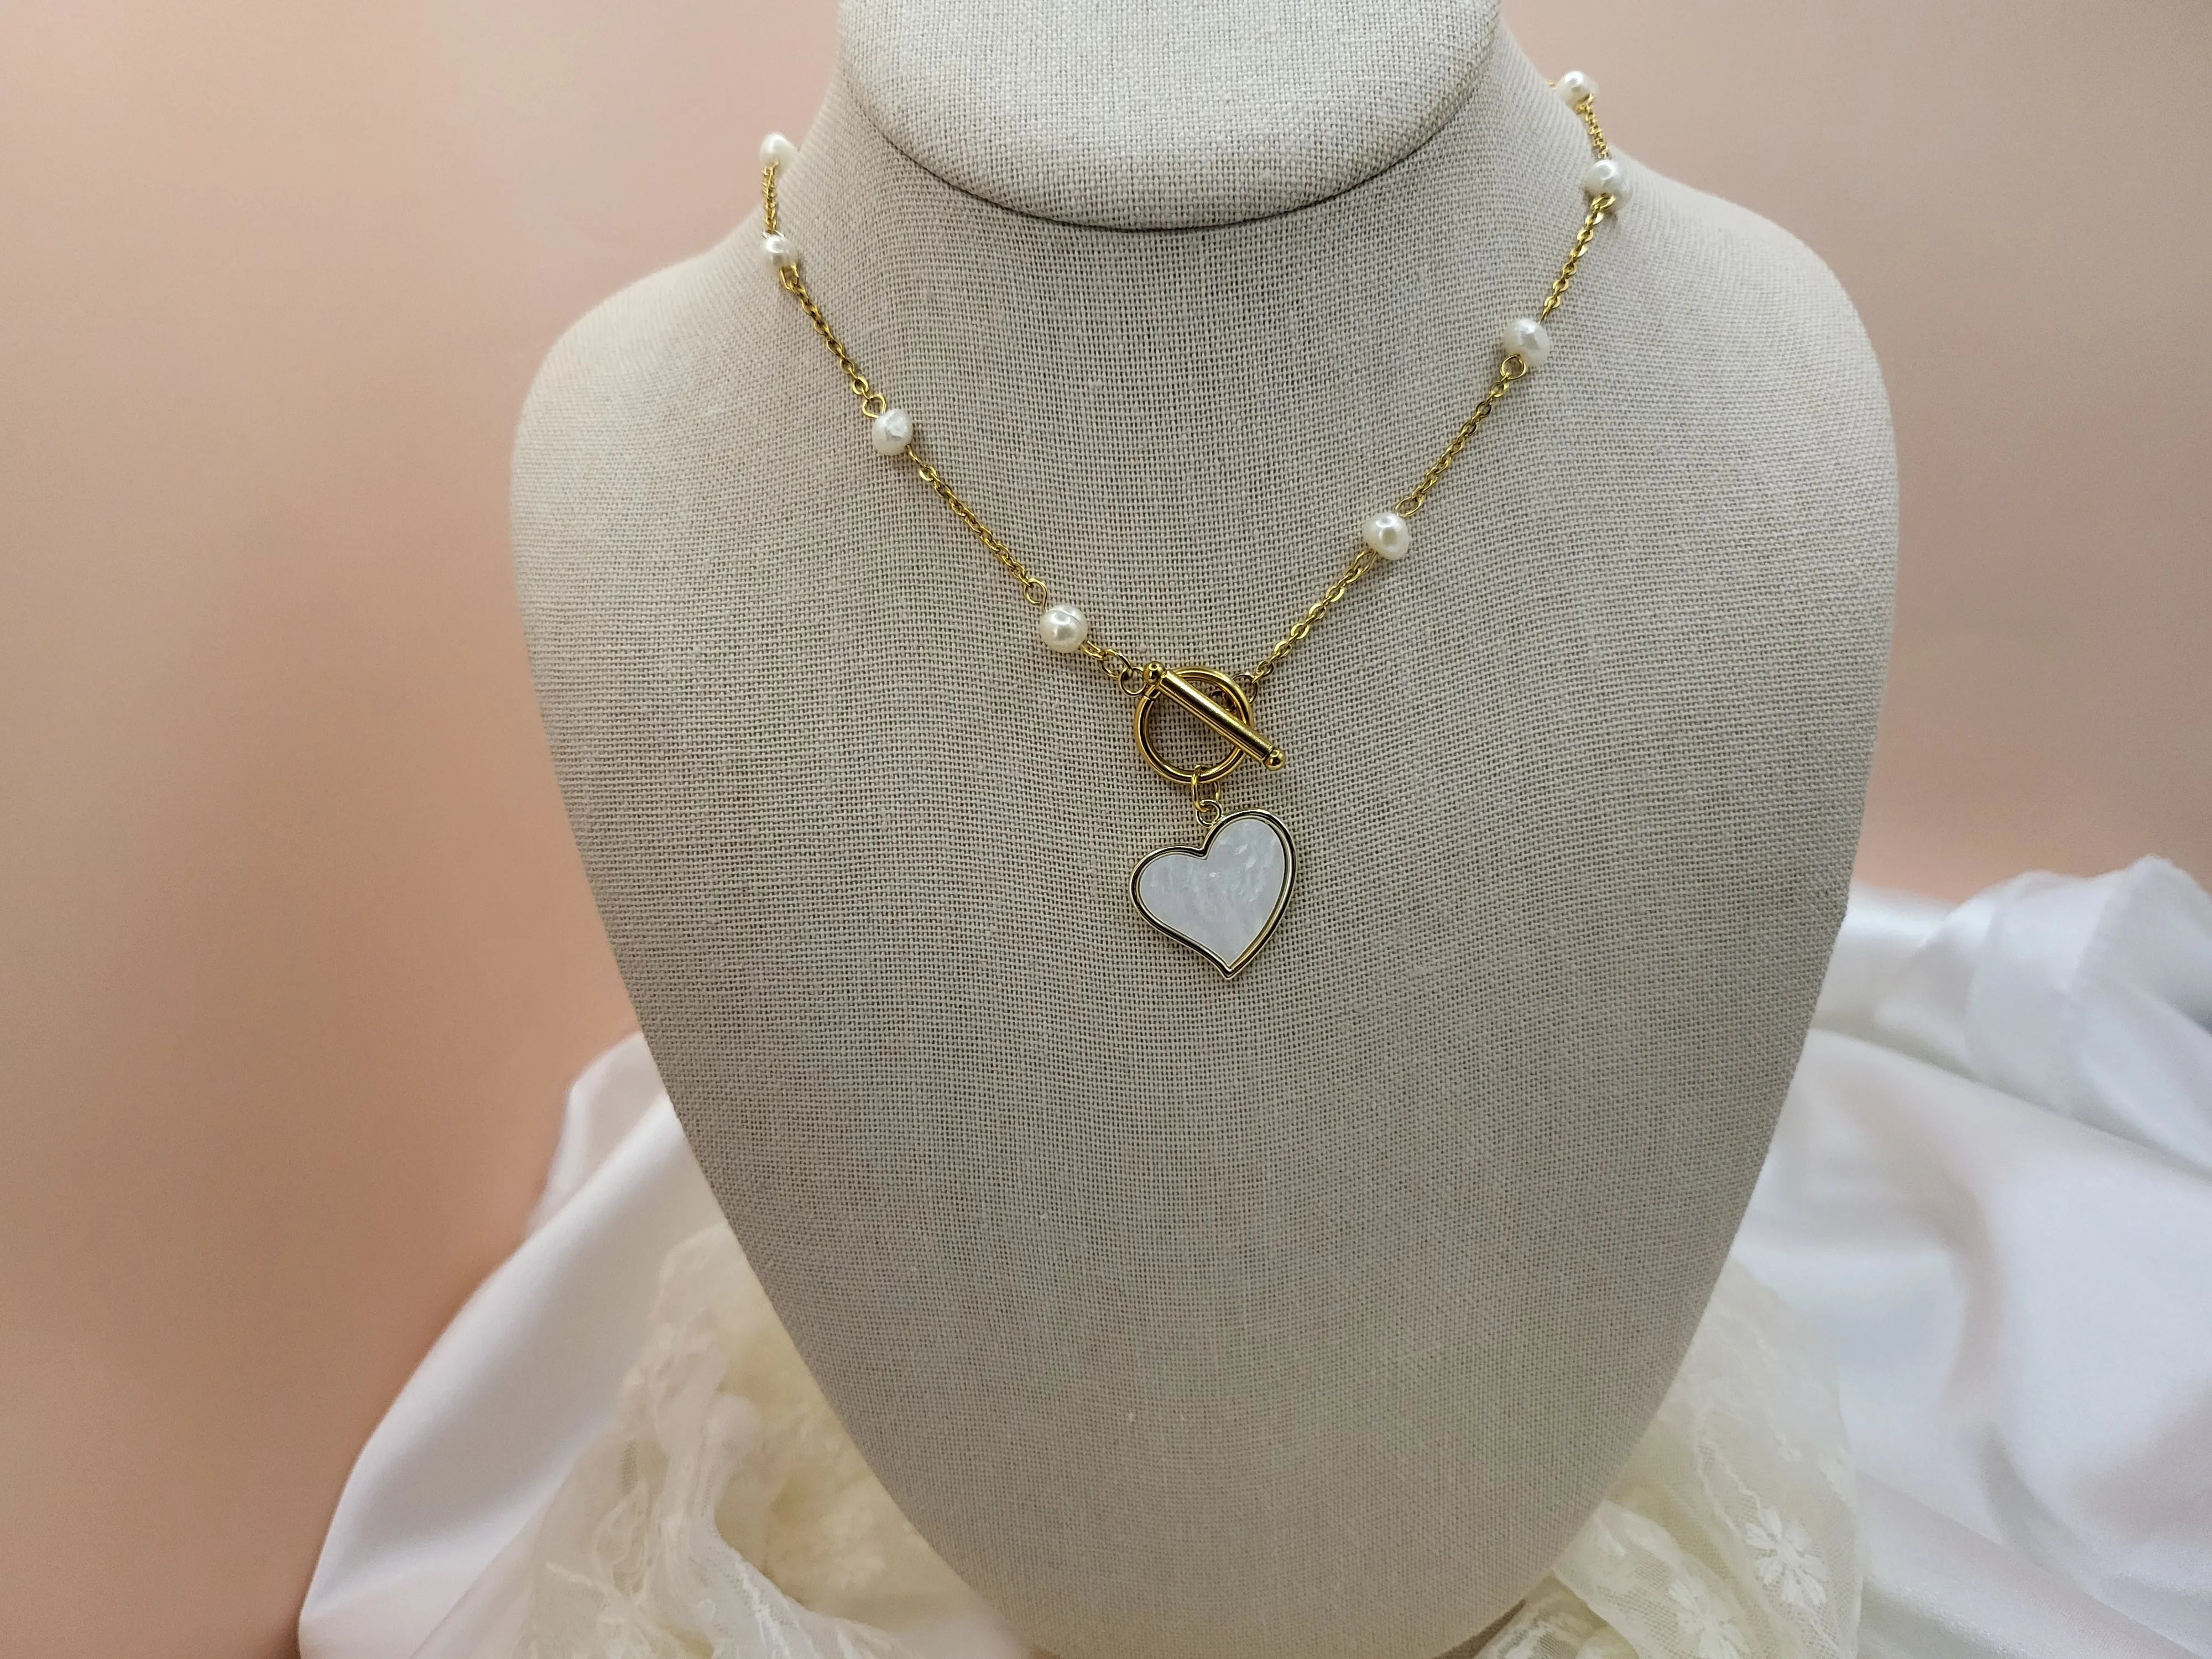 Eva Toggle Heart Necklace product images.